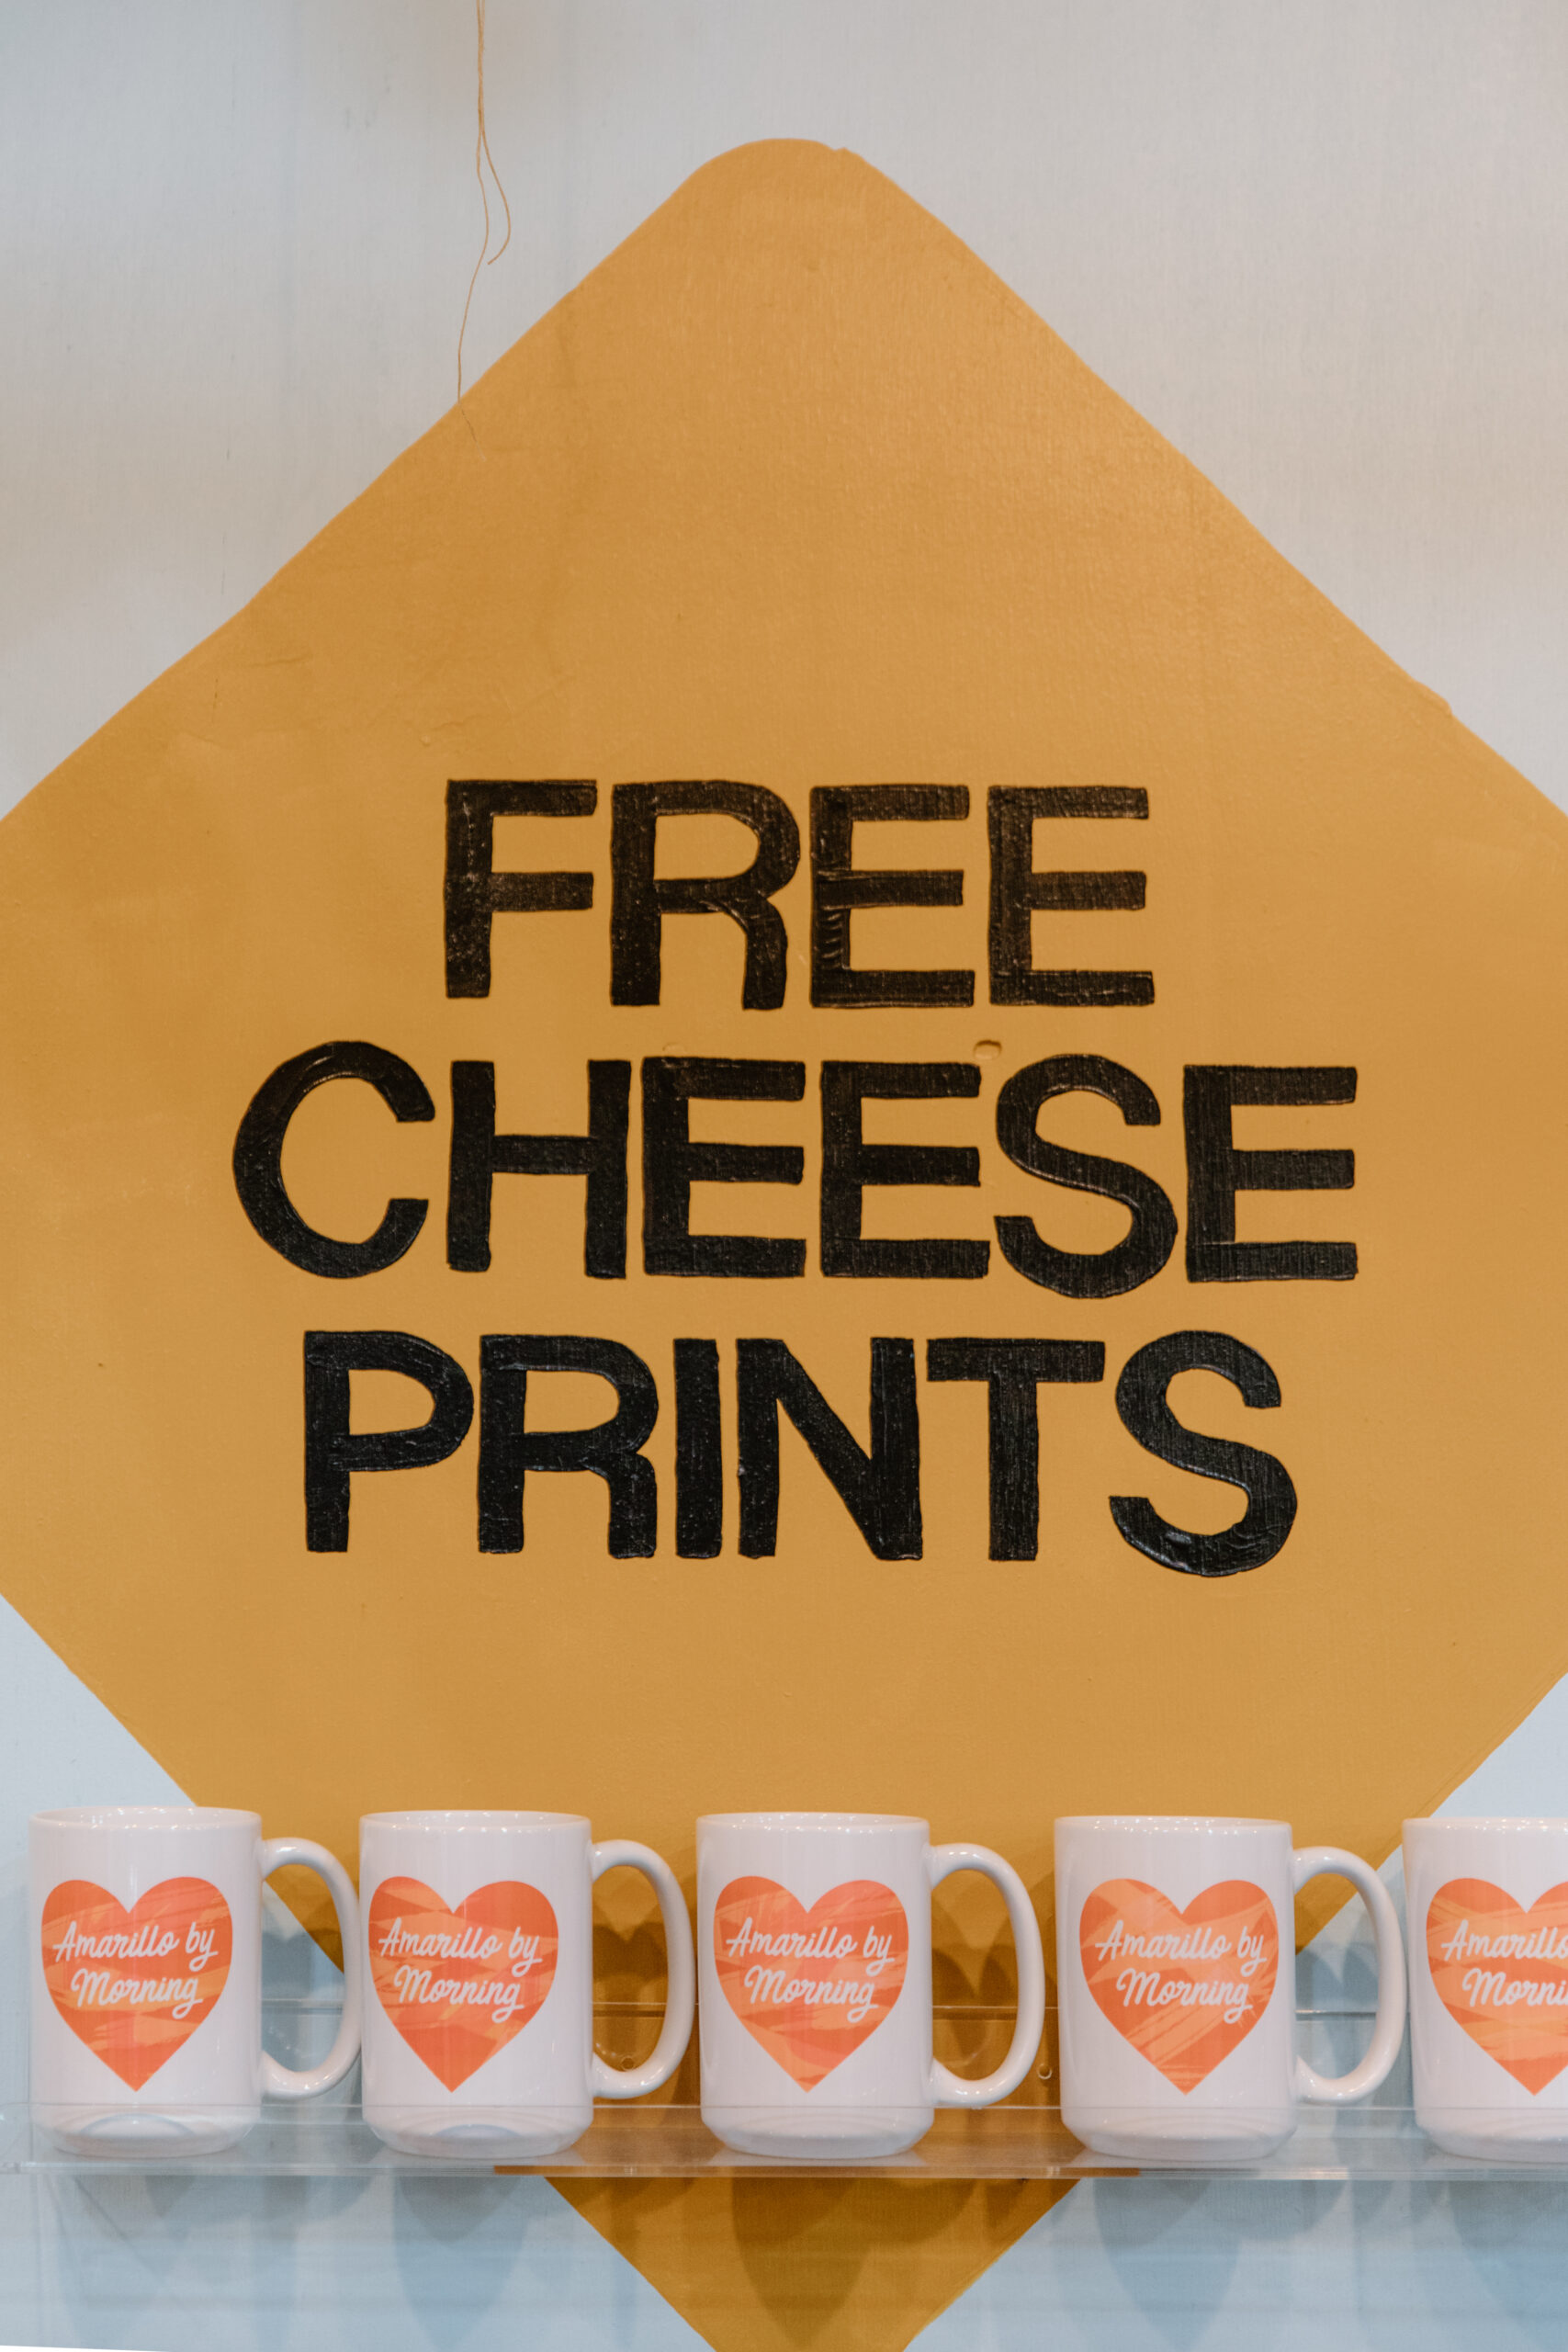 Free Cheese Prints in From 6th Collective, located in Amarillo, TX.